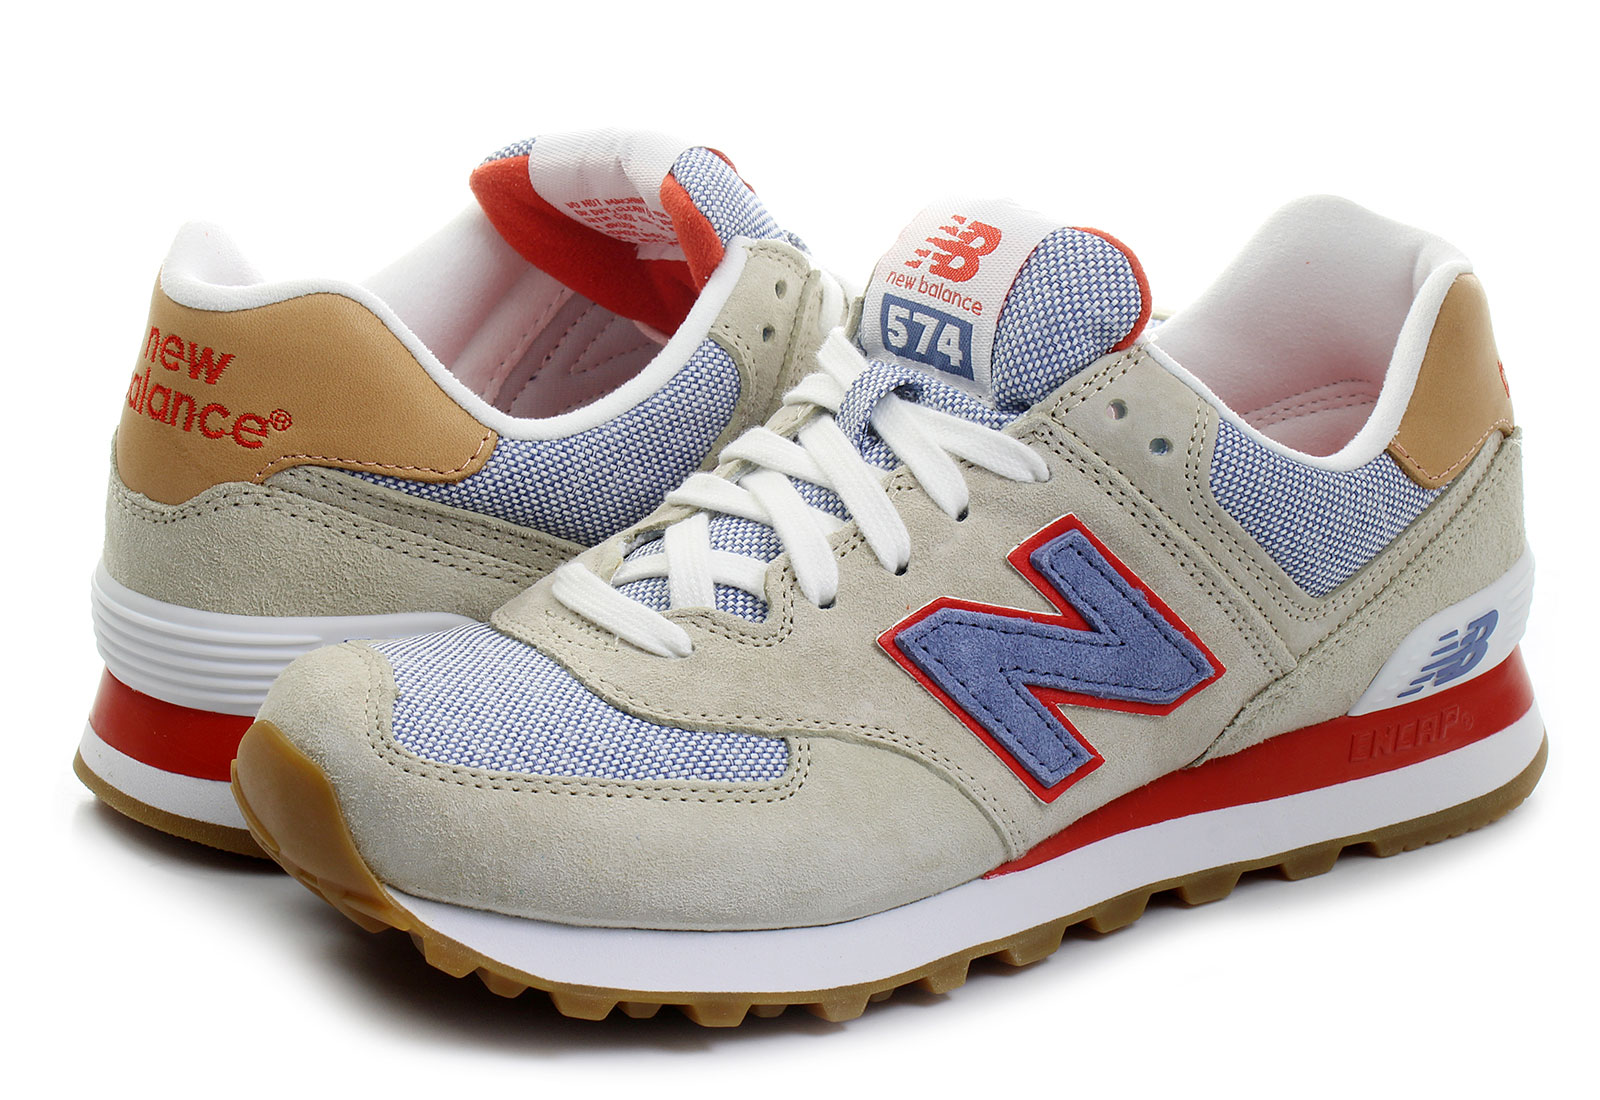 New Balance Shoes - Ml574 - ML574PIC - Online shop for sneakers, shoes